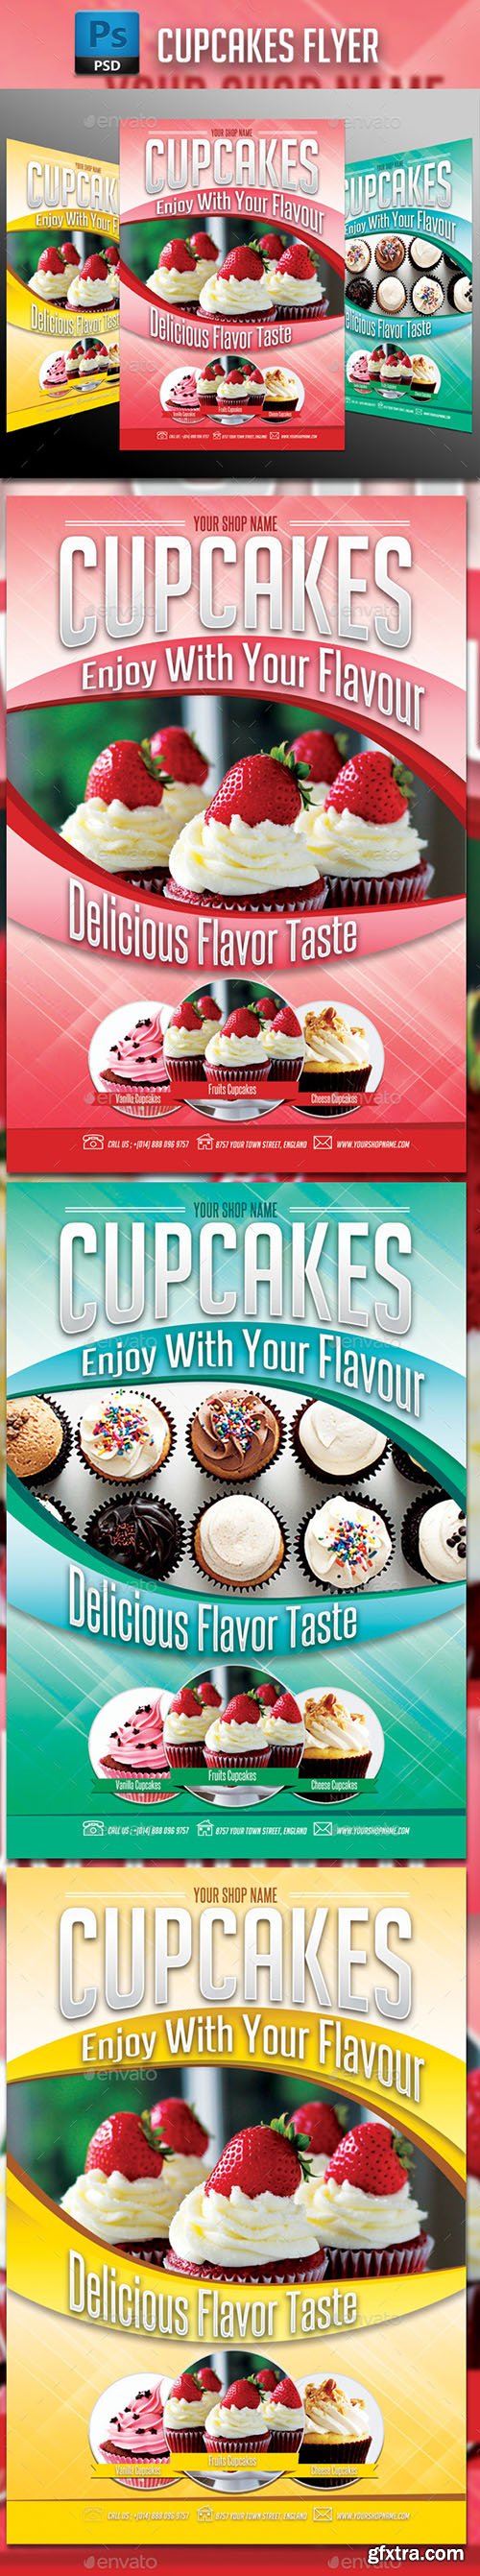 GraphicRiver Cupcakes Flyer